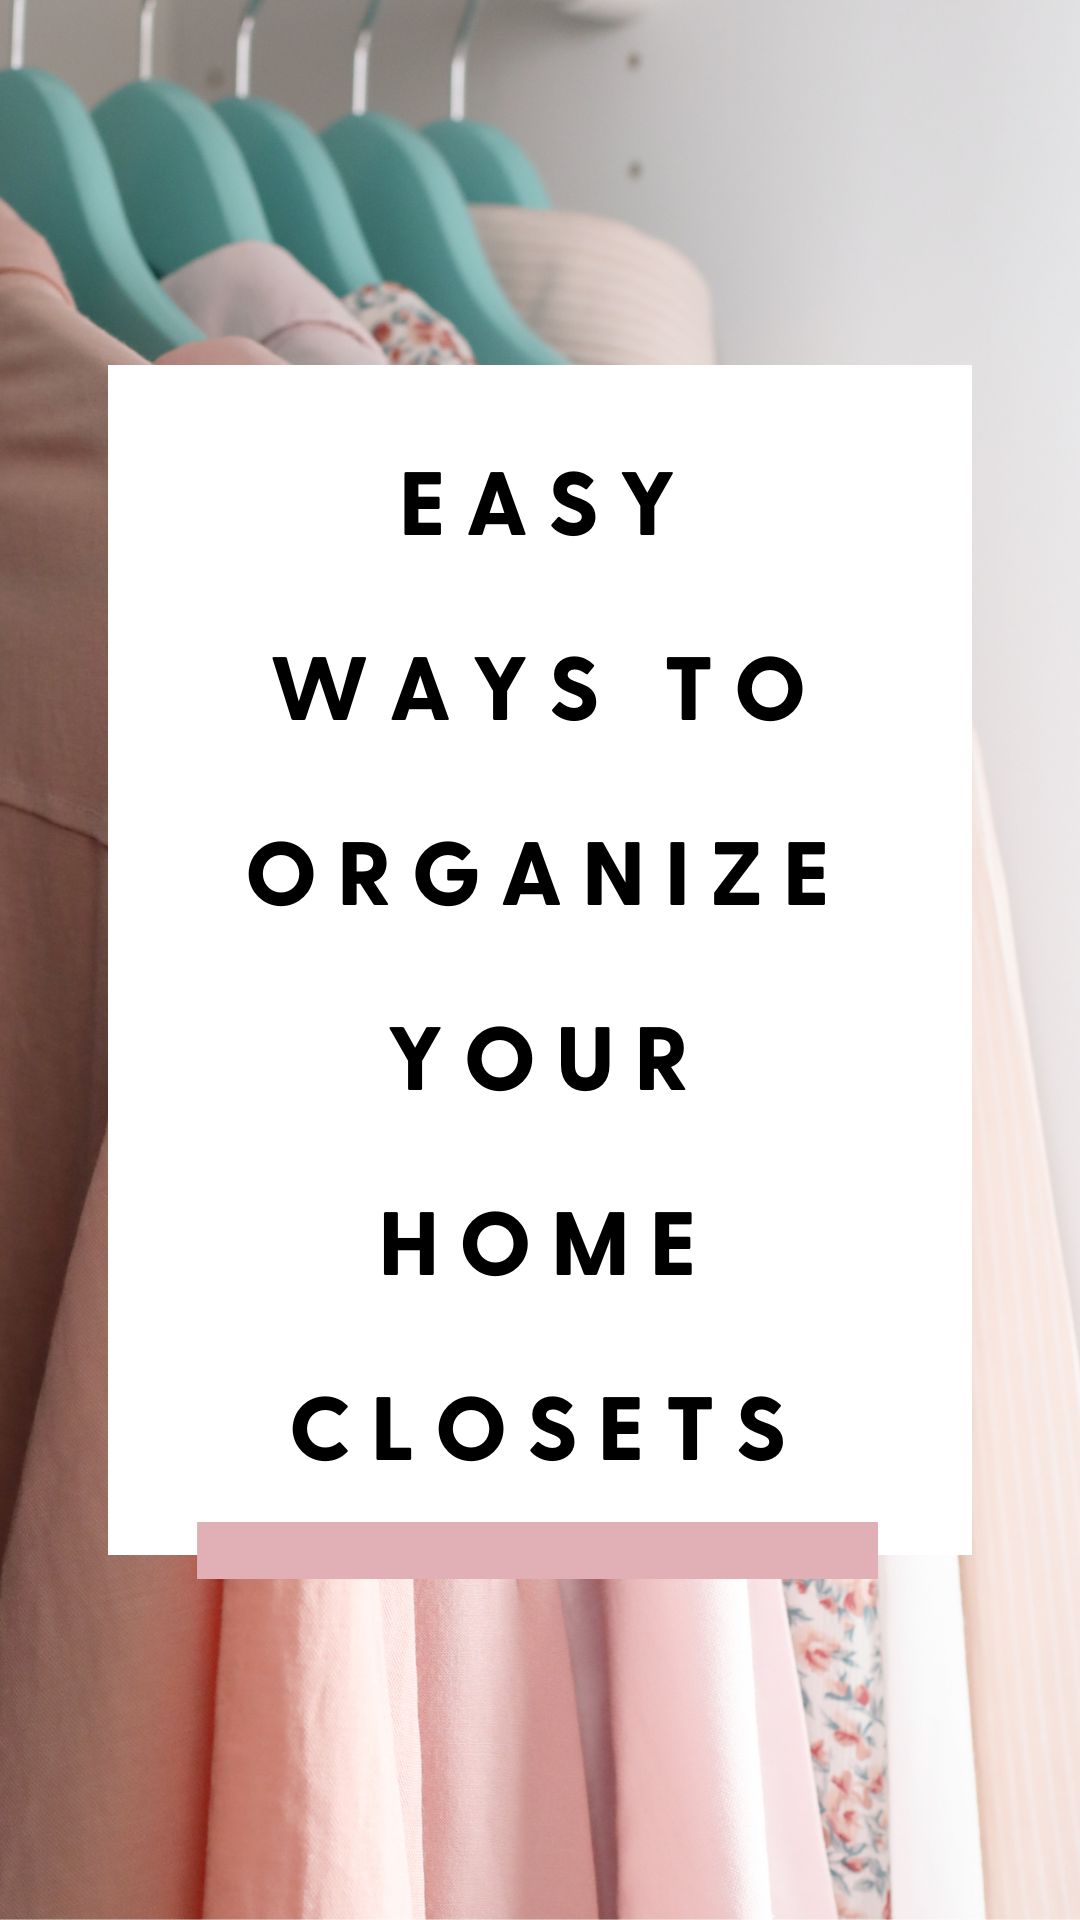 Easy Ways to Organize Your Home Closets